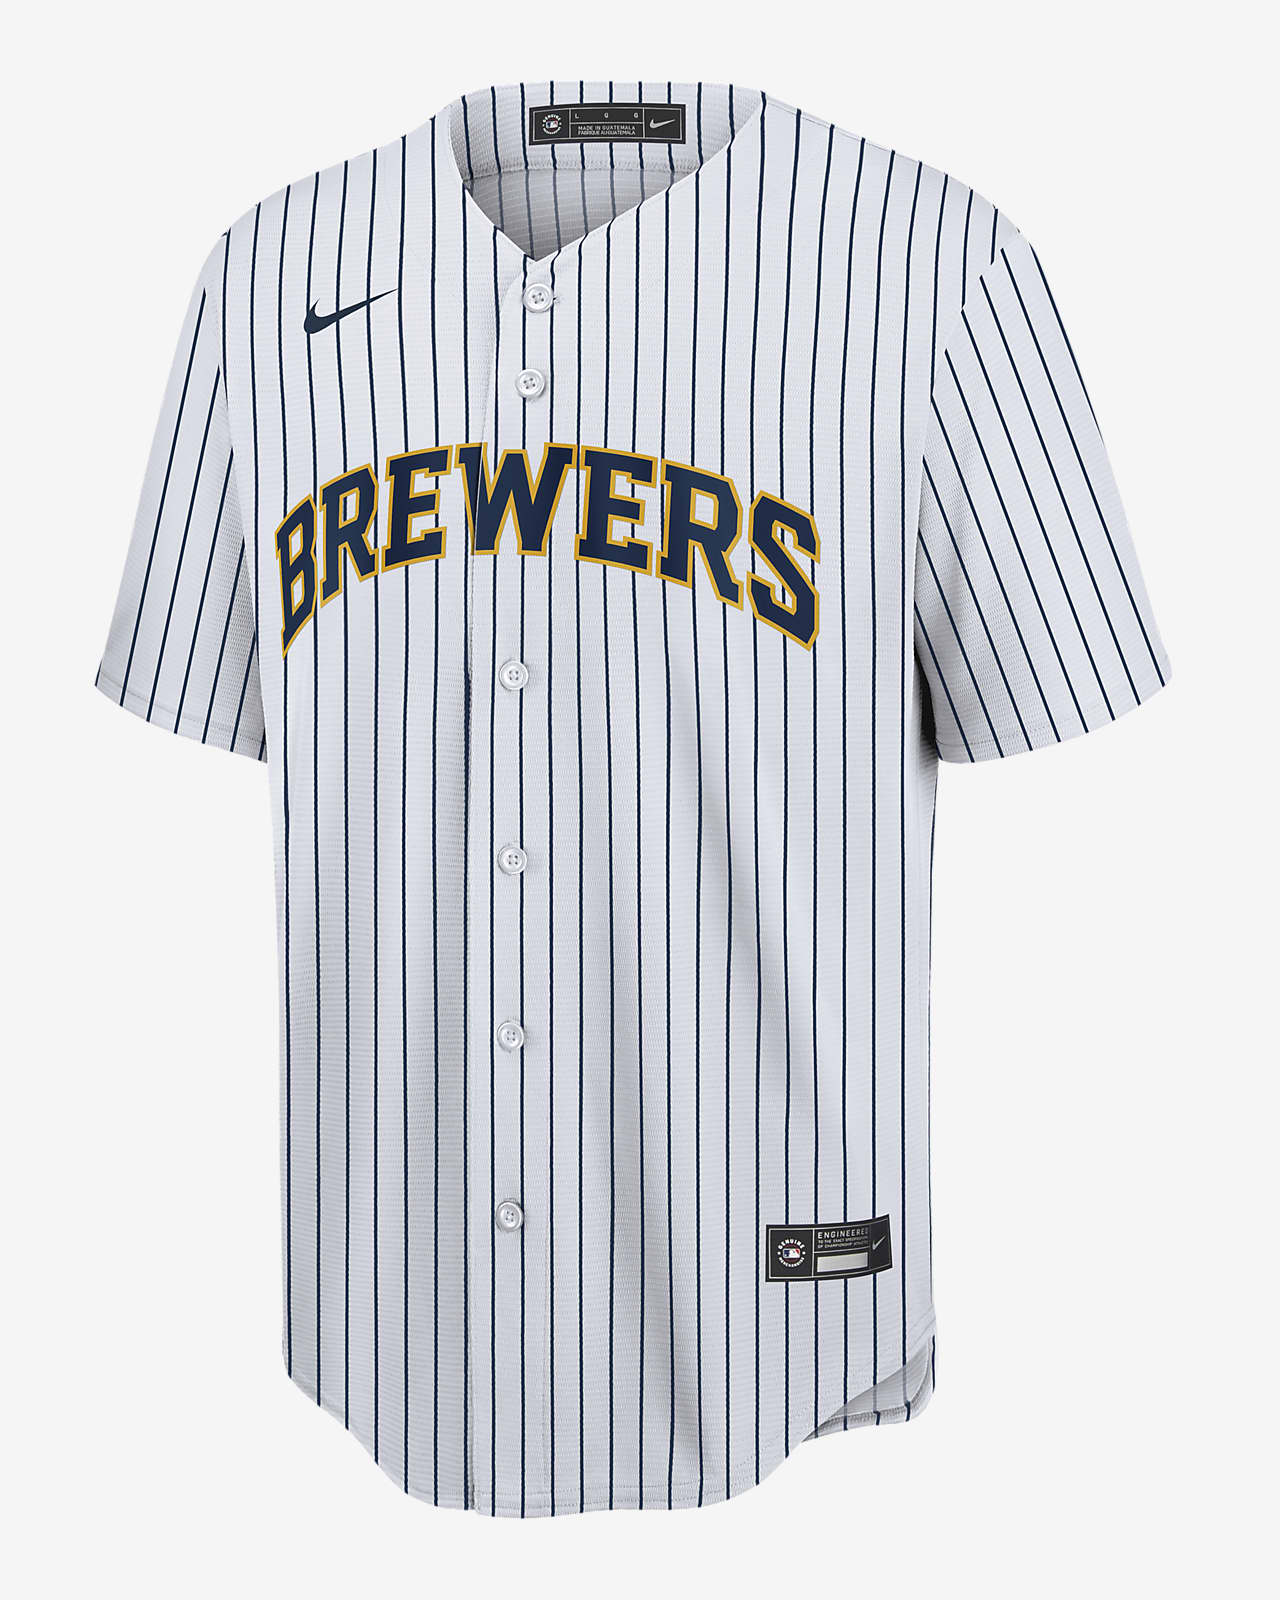 brewers nike uniforms